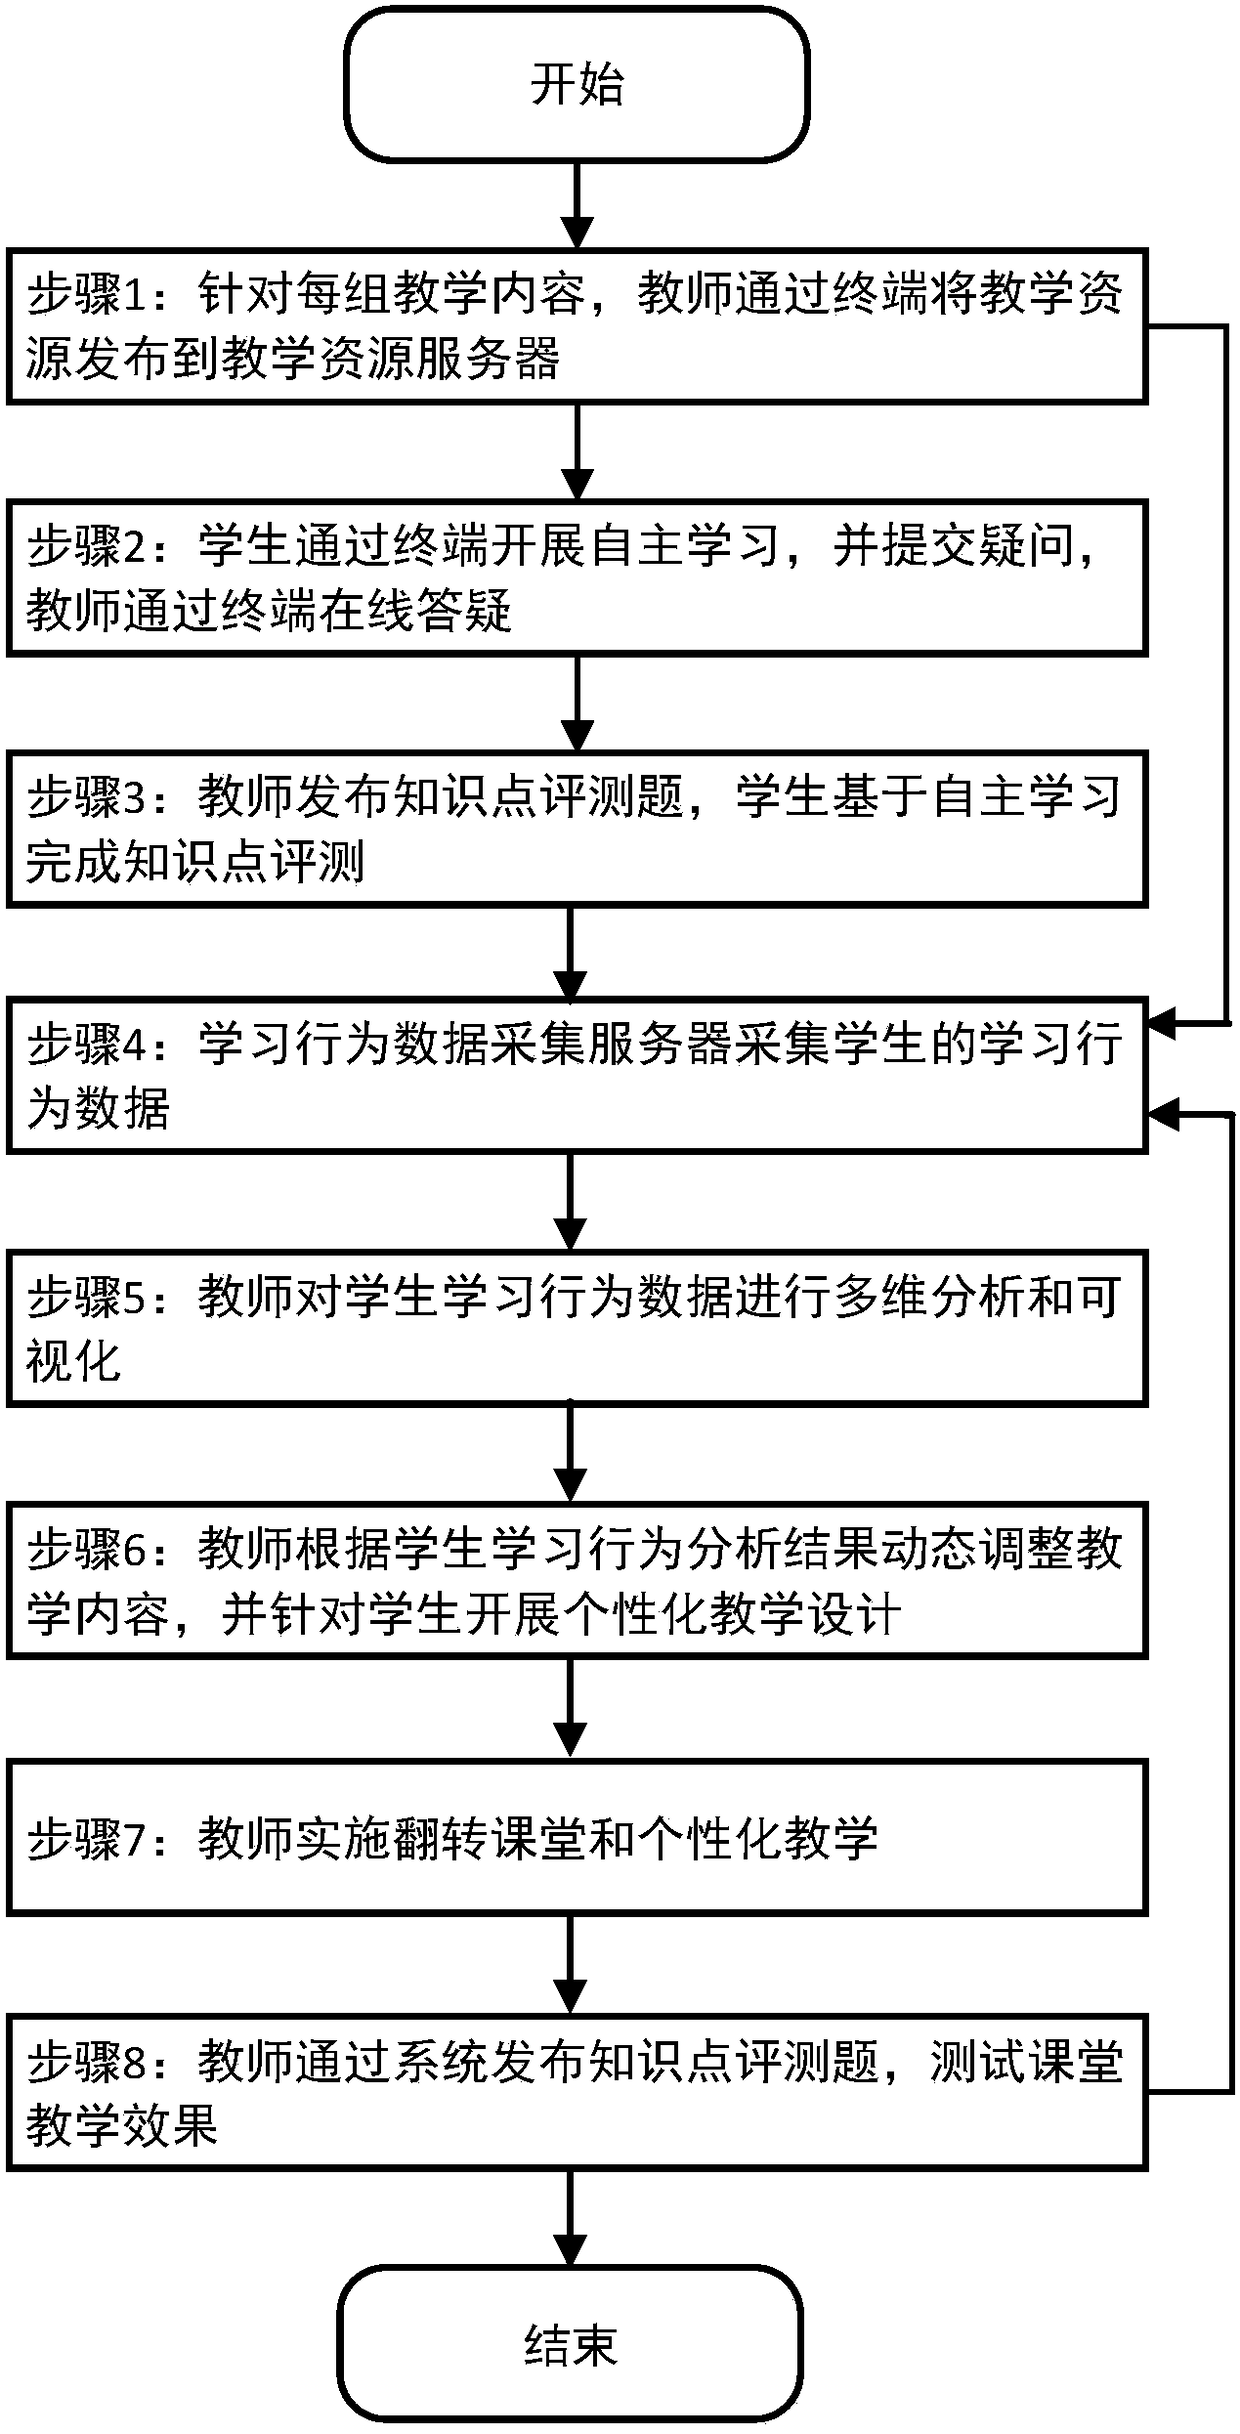 Teaching system and method based on learning behavior analysis